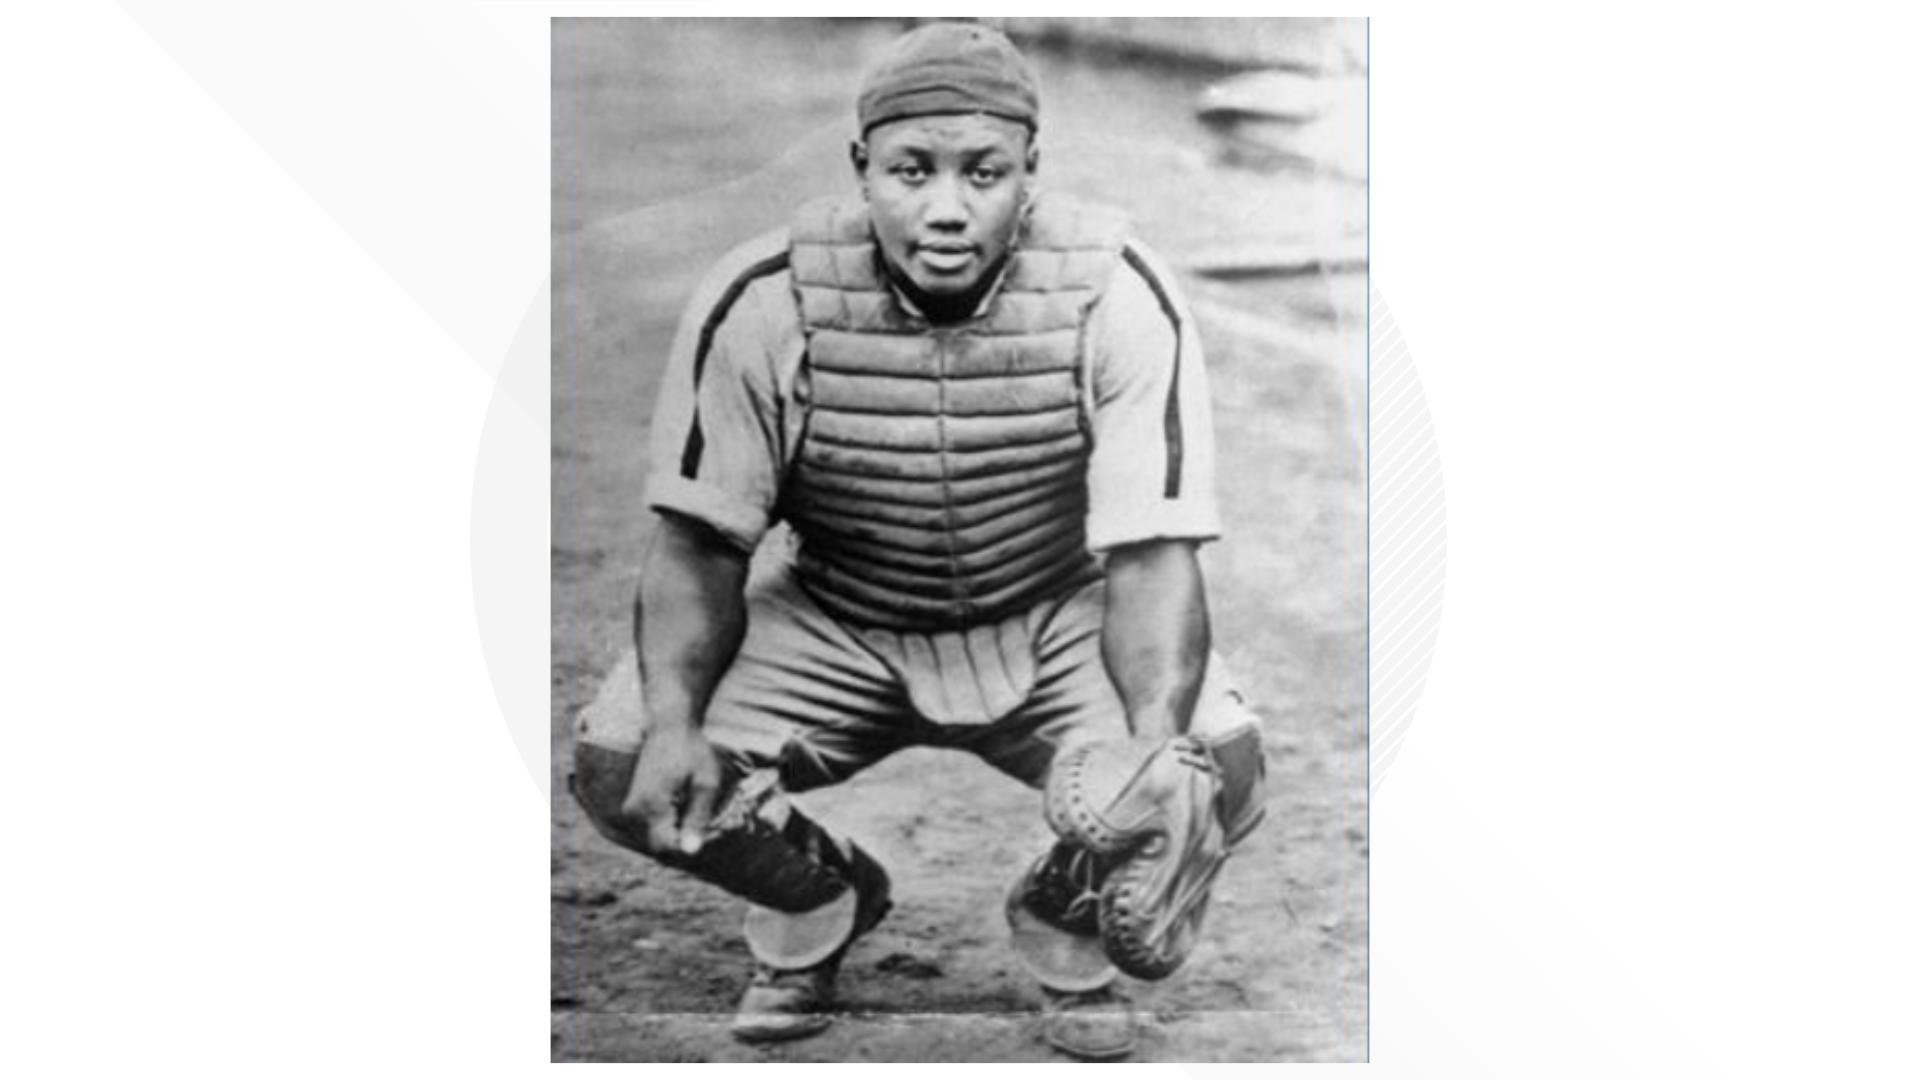 Negro Leagues records for more than 2,300 players were incorporated into MLB records after a three-year research project.